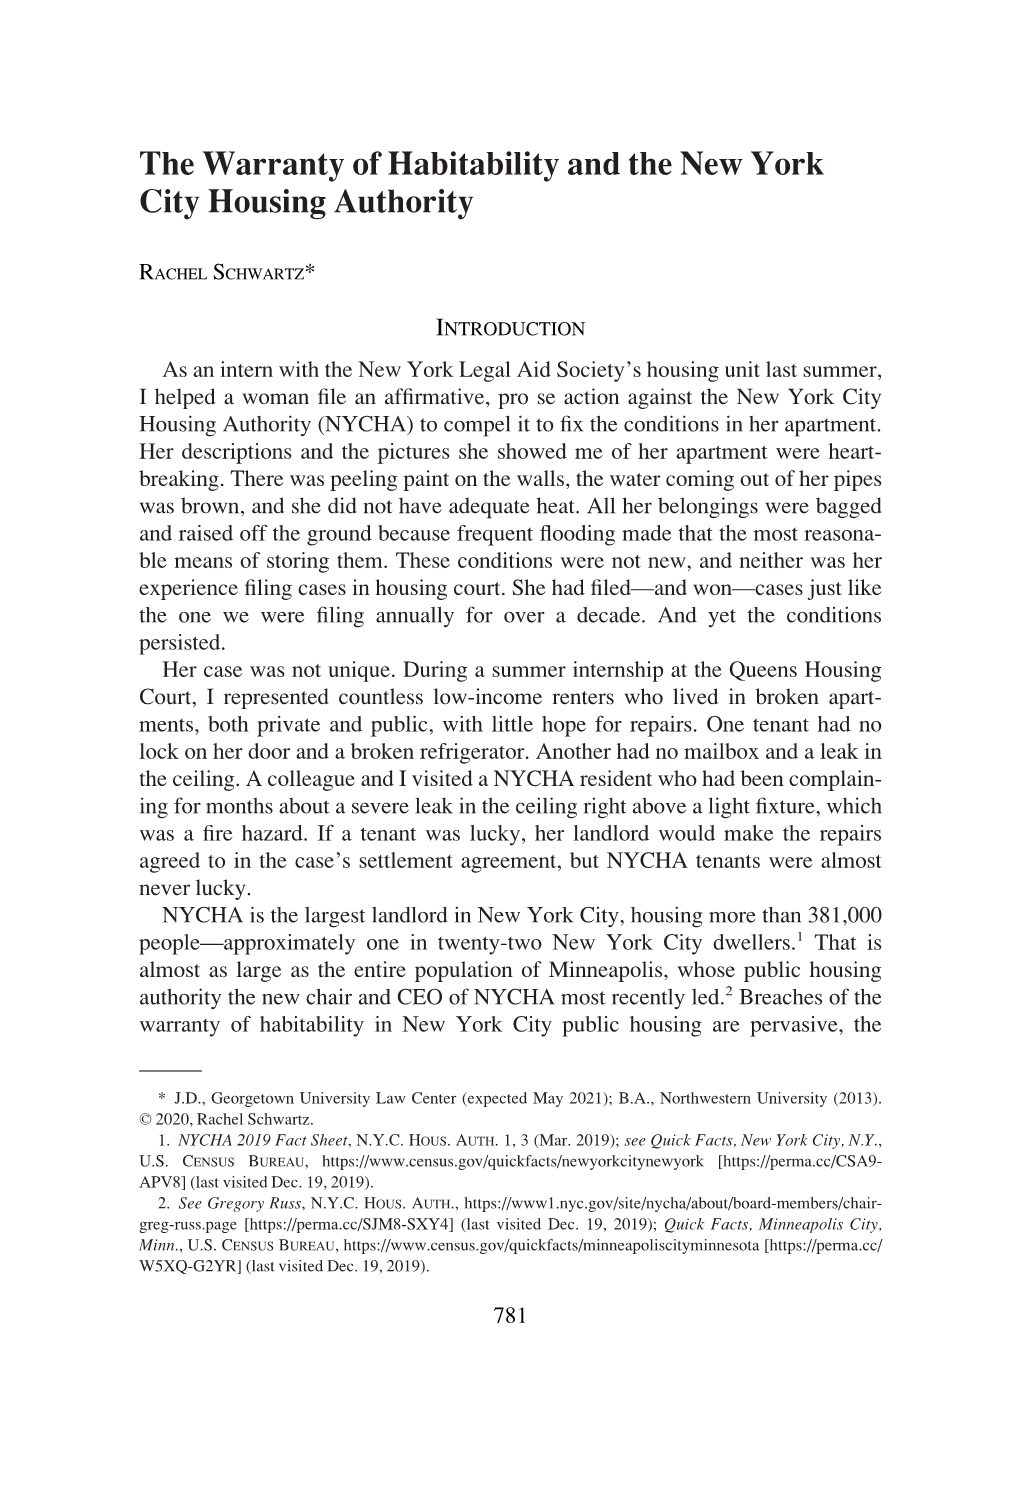 The Warranty of Habitability and the New York City Housing Authority